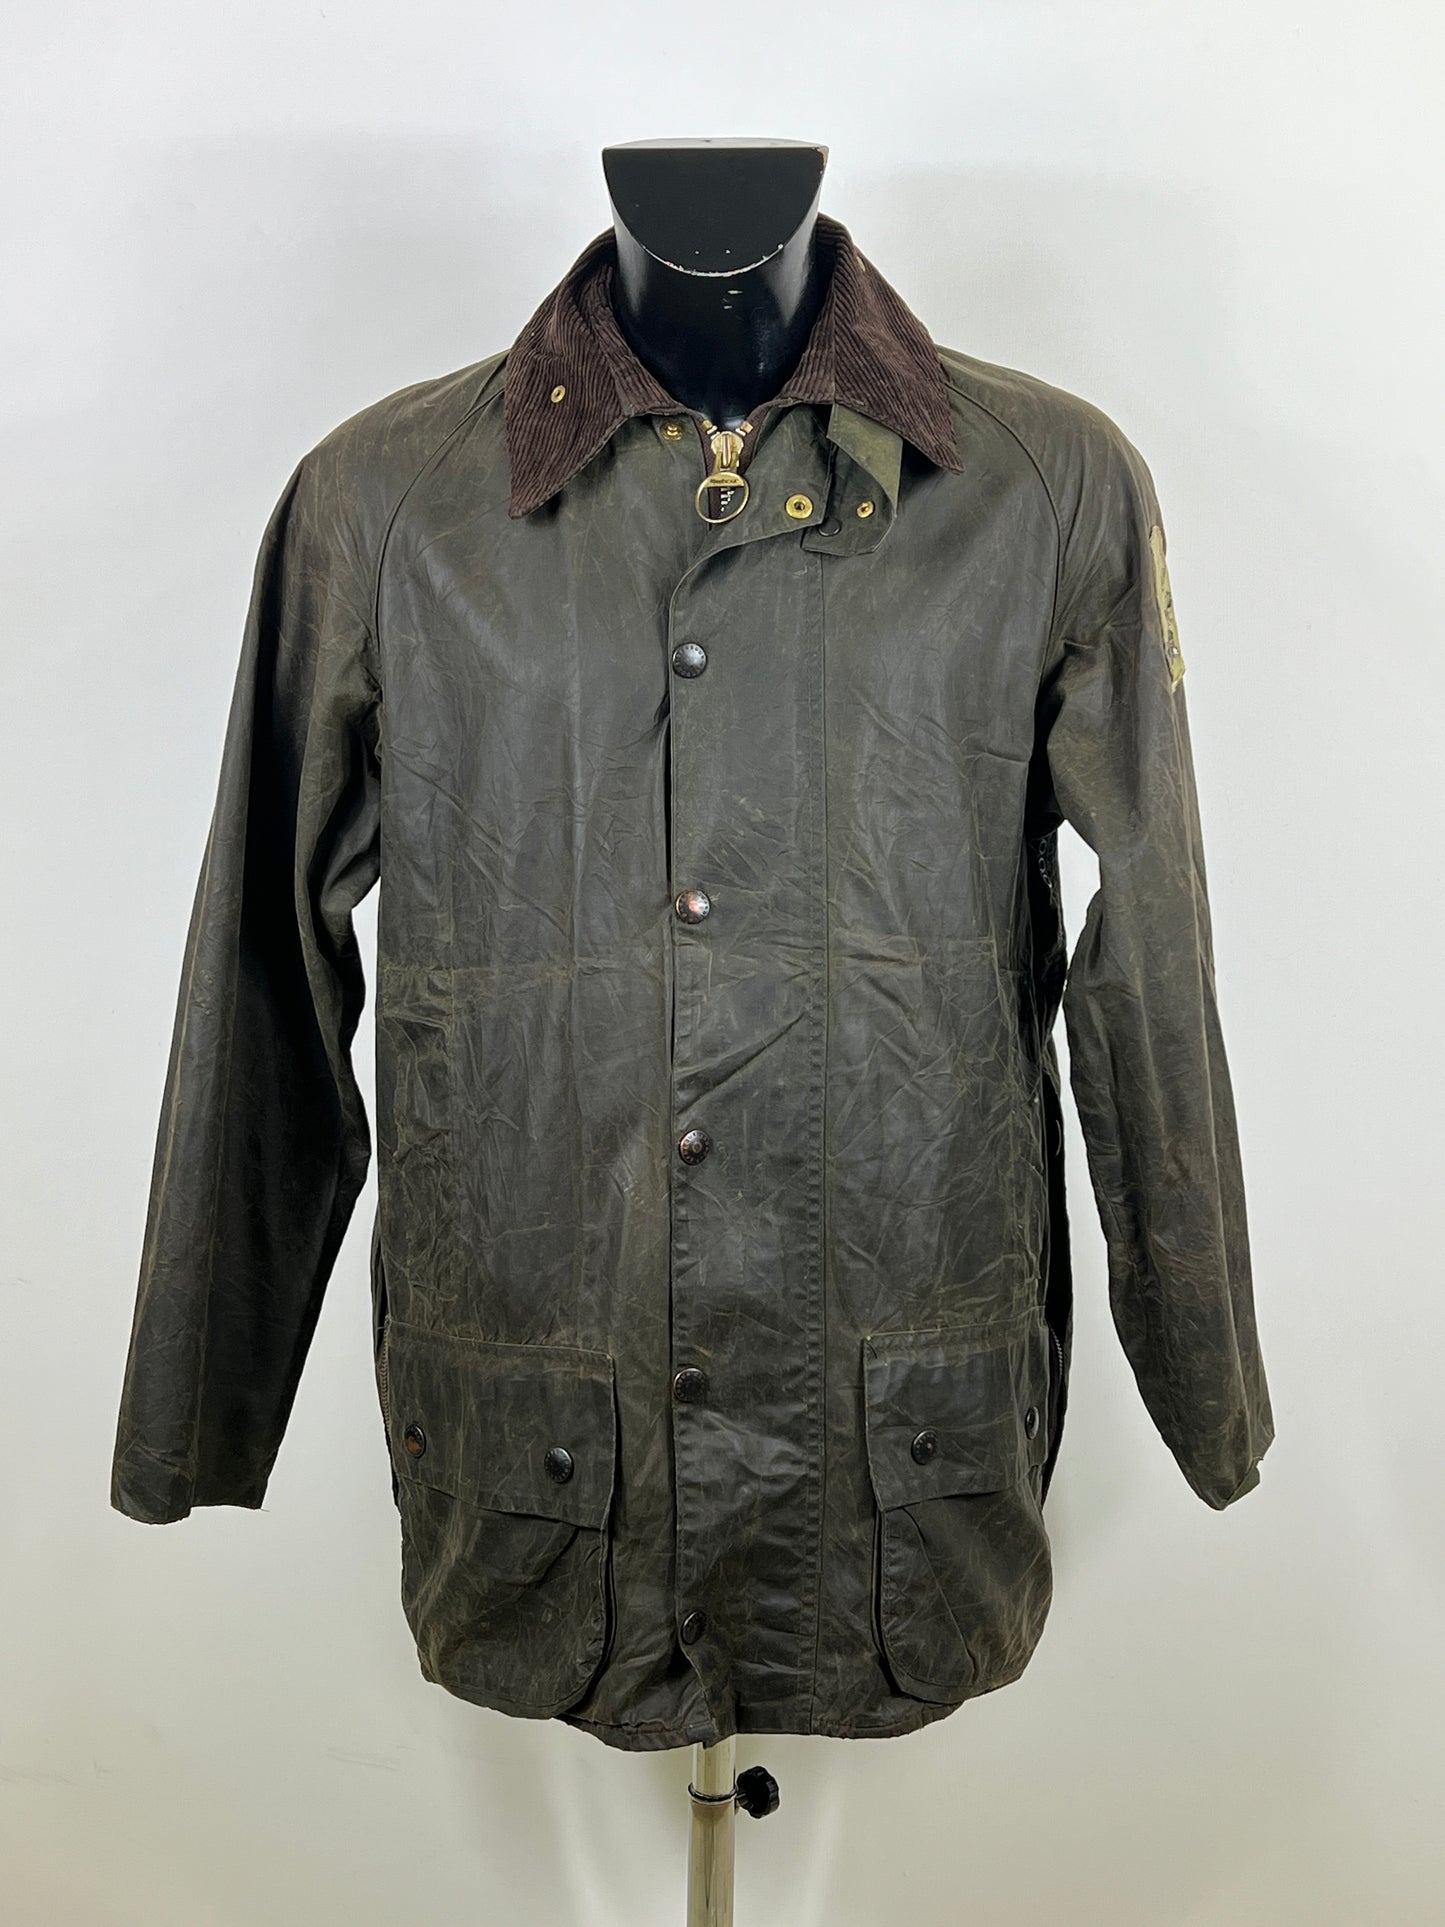 Barbour Giacca Beaufort vintage verde C38/97 cm -Green waxed Beaufort Jacket Size Small